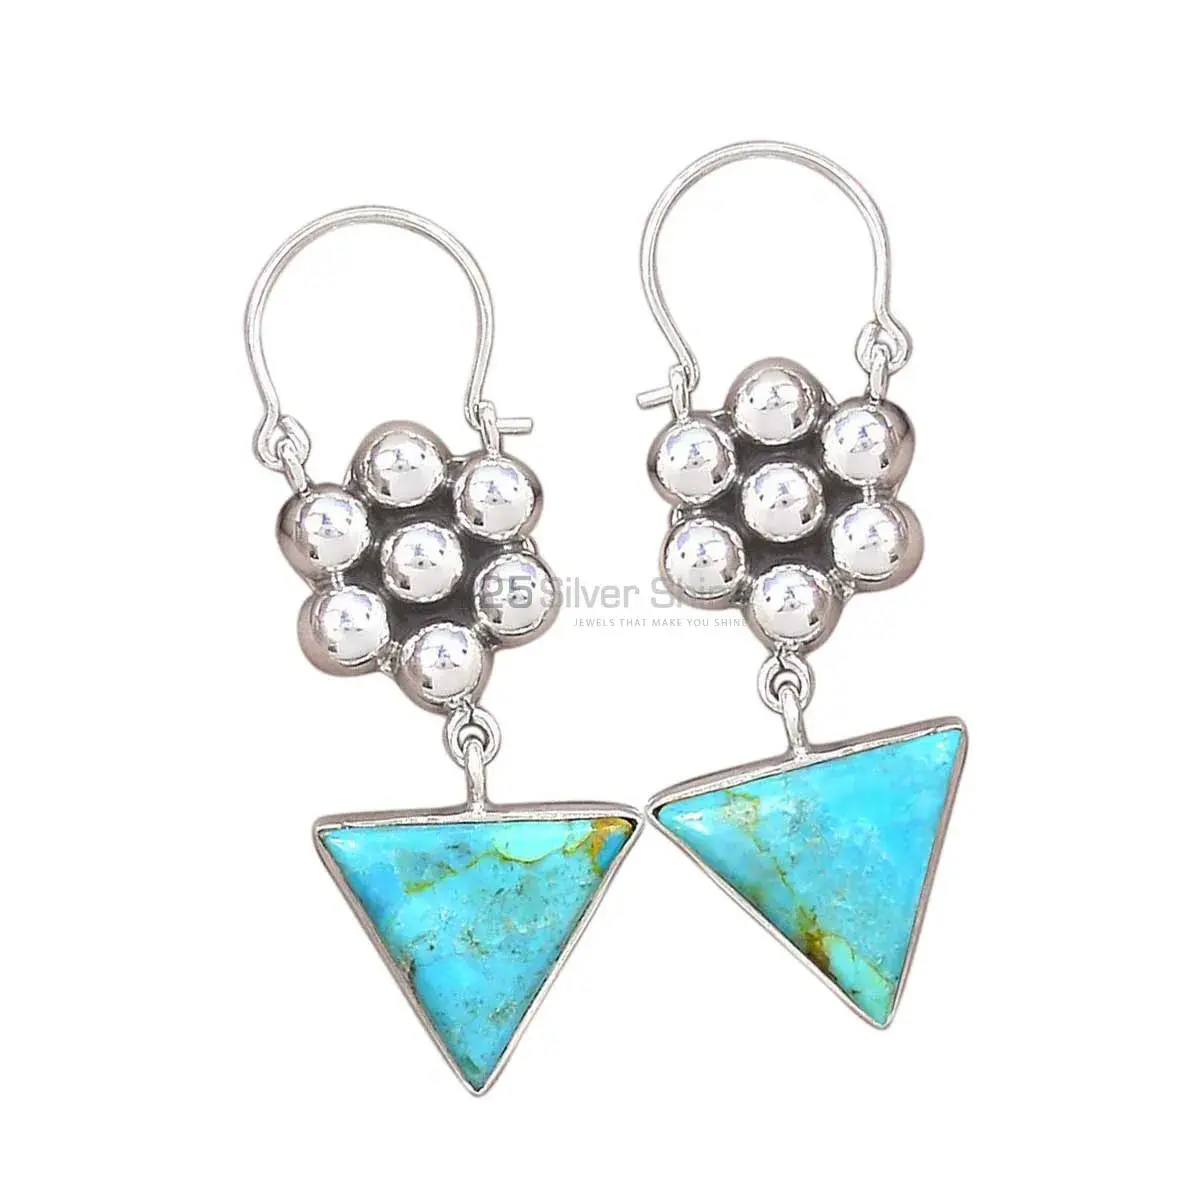 Natural Turquoise Gemstone Earrings Exporters In 925 Sterling Silver Jewelry 925SE3082